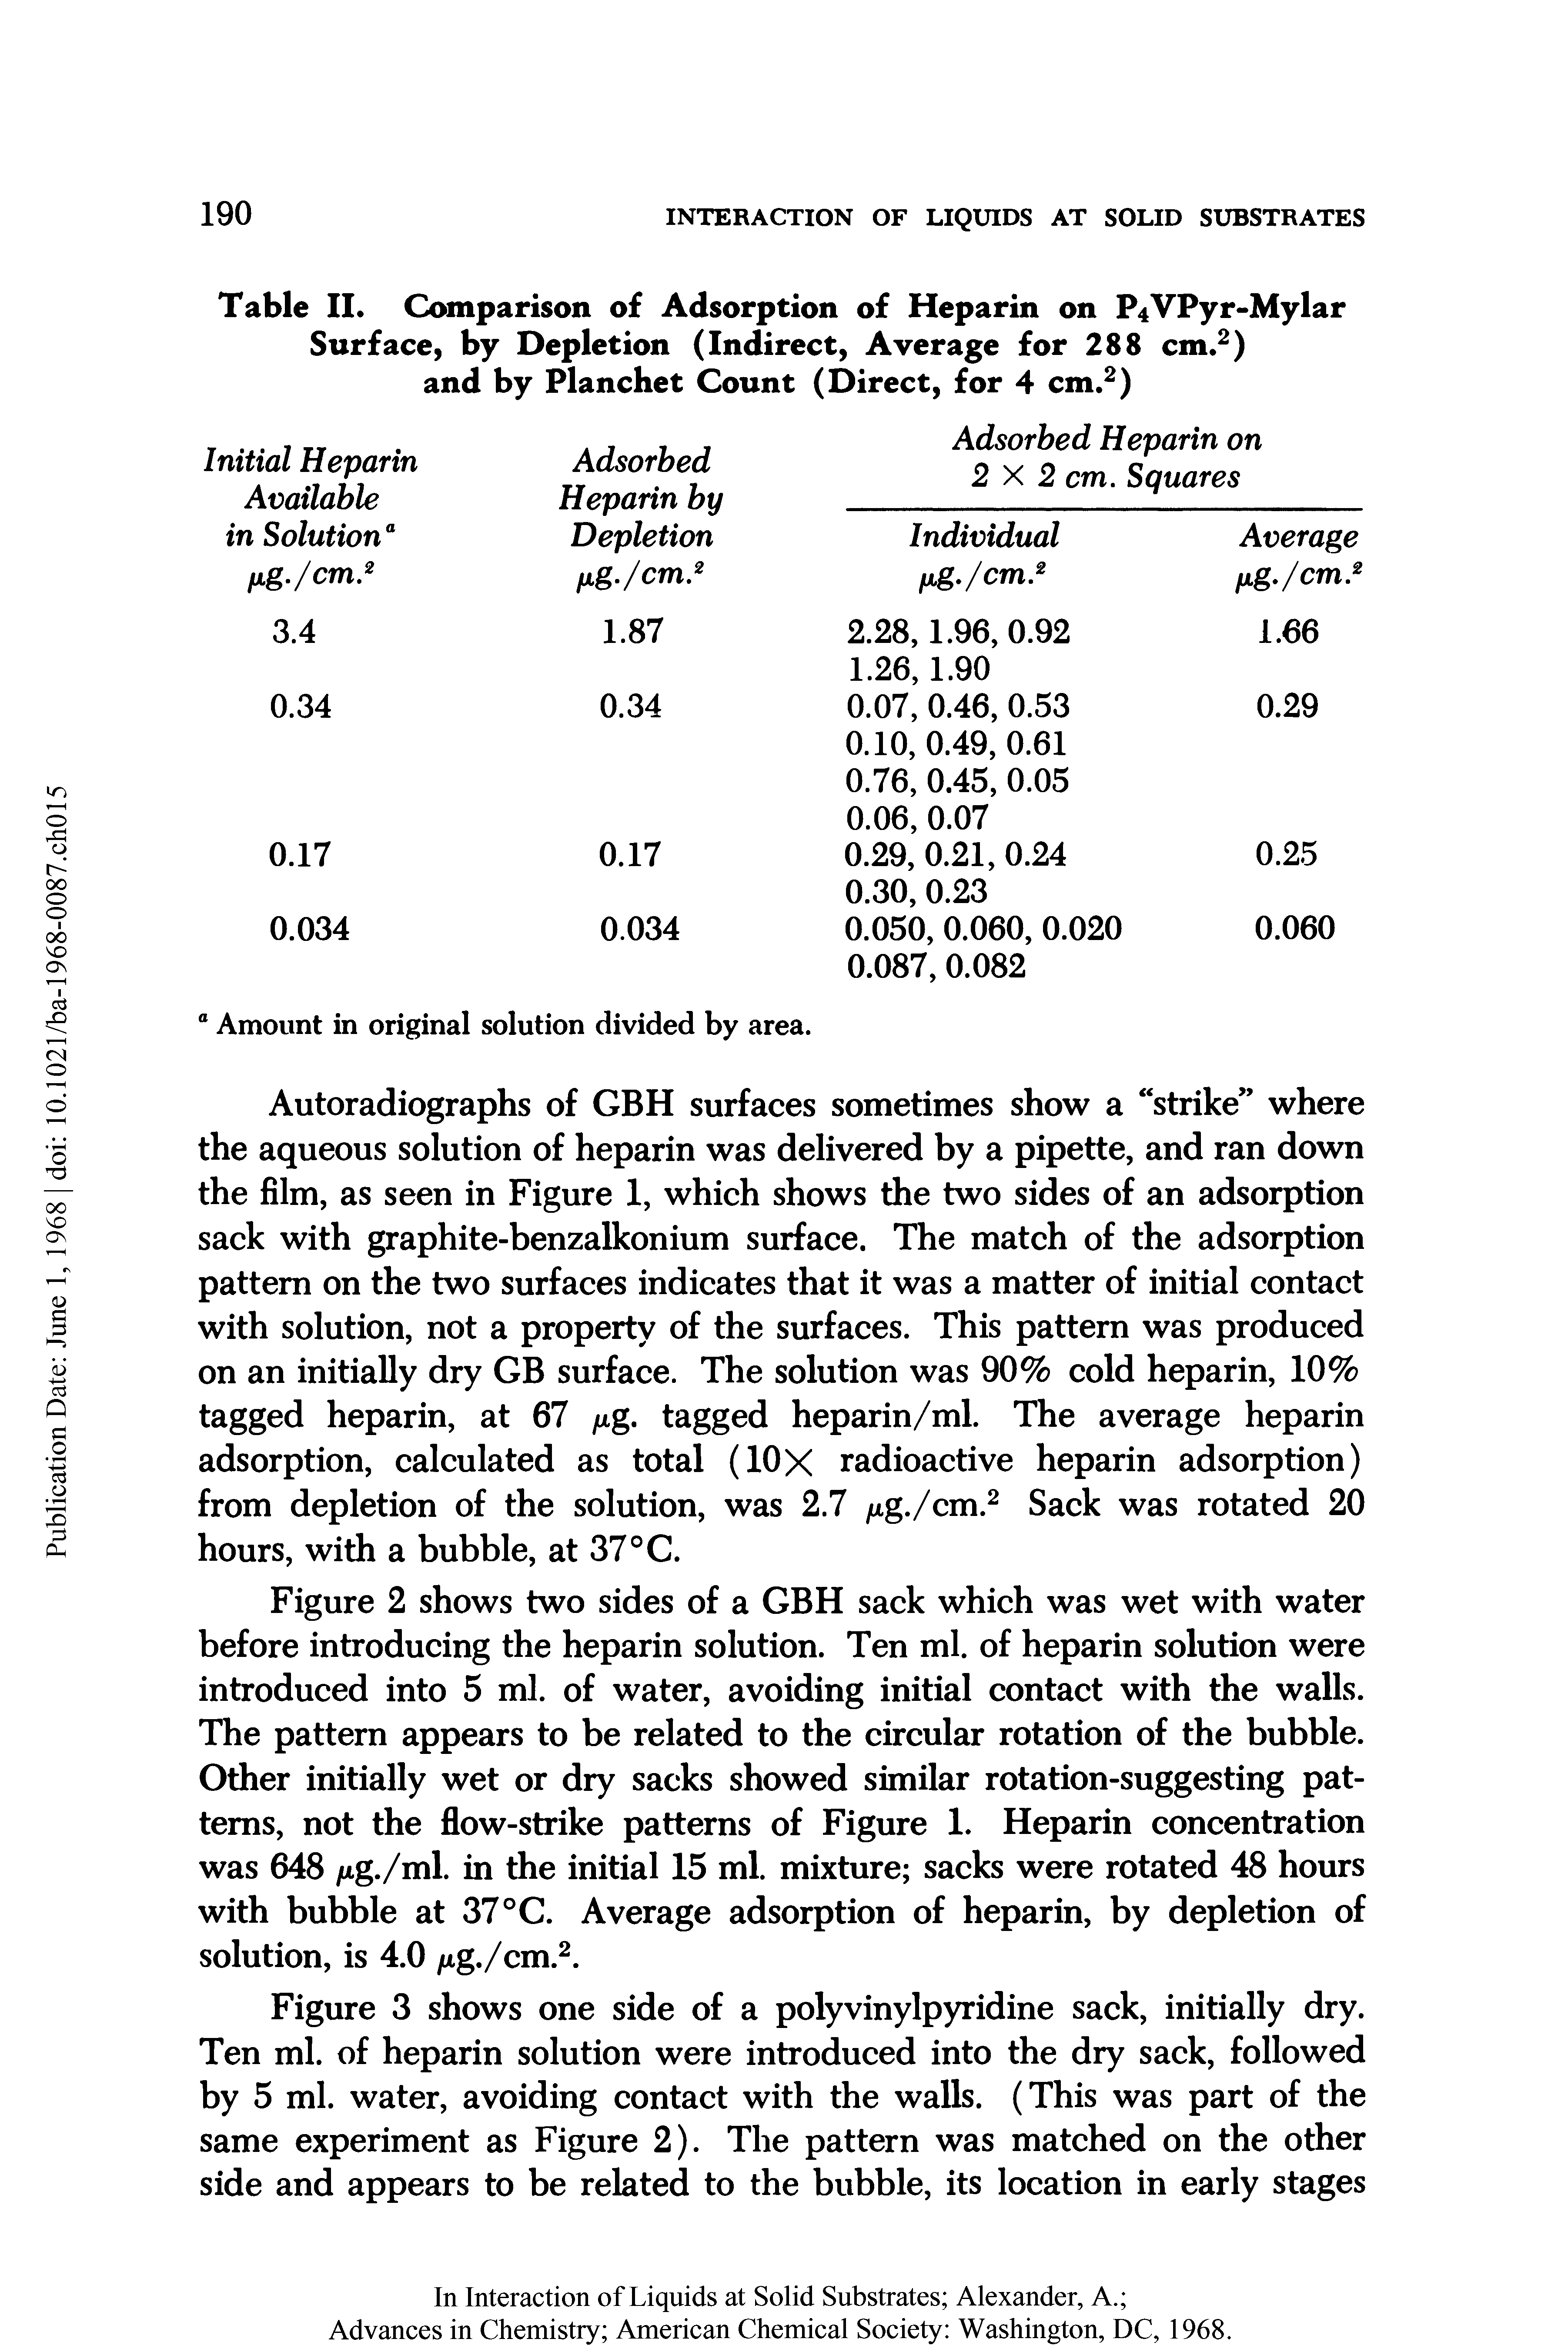 Table II. Comparison of Adsorption of Heparin on P4VPyr-Mylar Surface, by Depletion (Indirect, Average for 288 cm.2) and by Planchet Count (Direct, for 4 cm.2)...